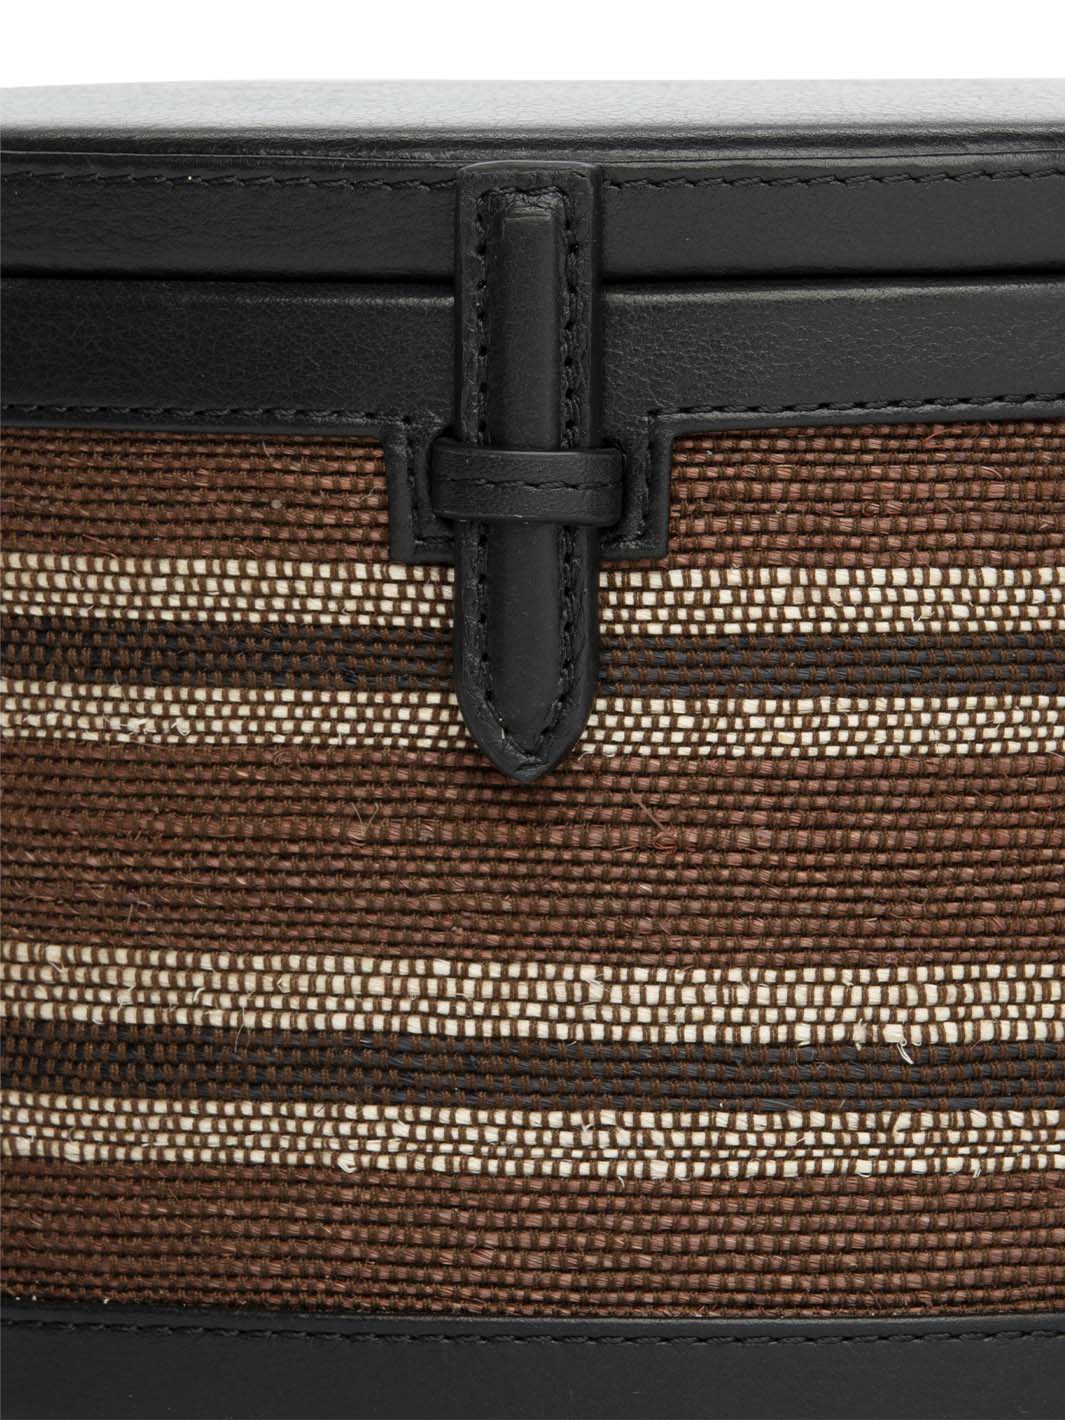 The Round Trunk in Nappa and Woven Fique